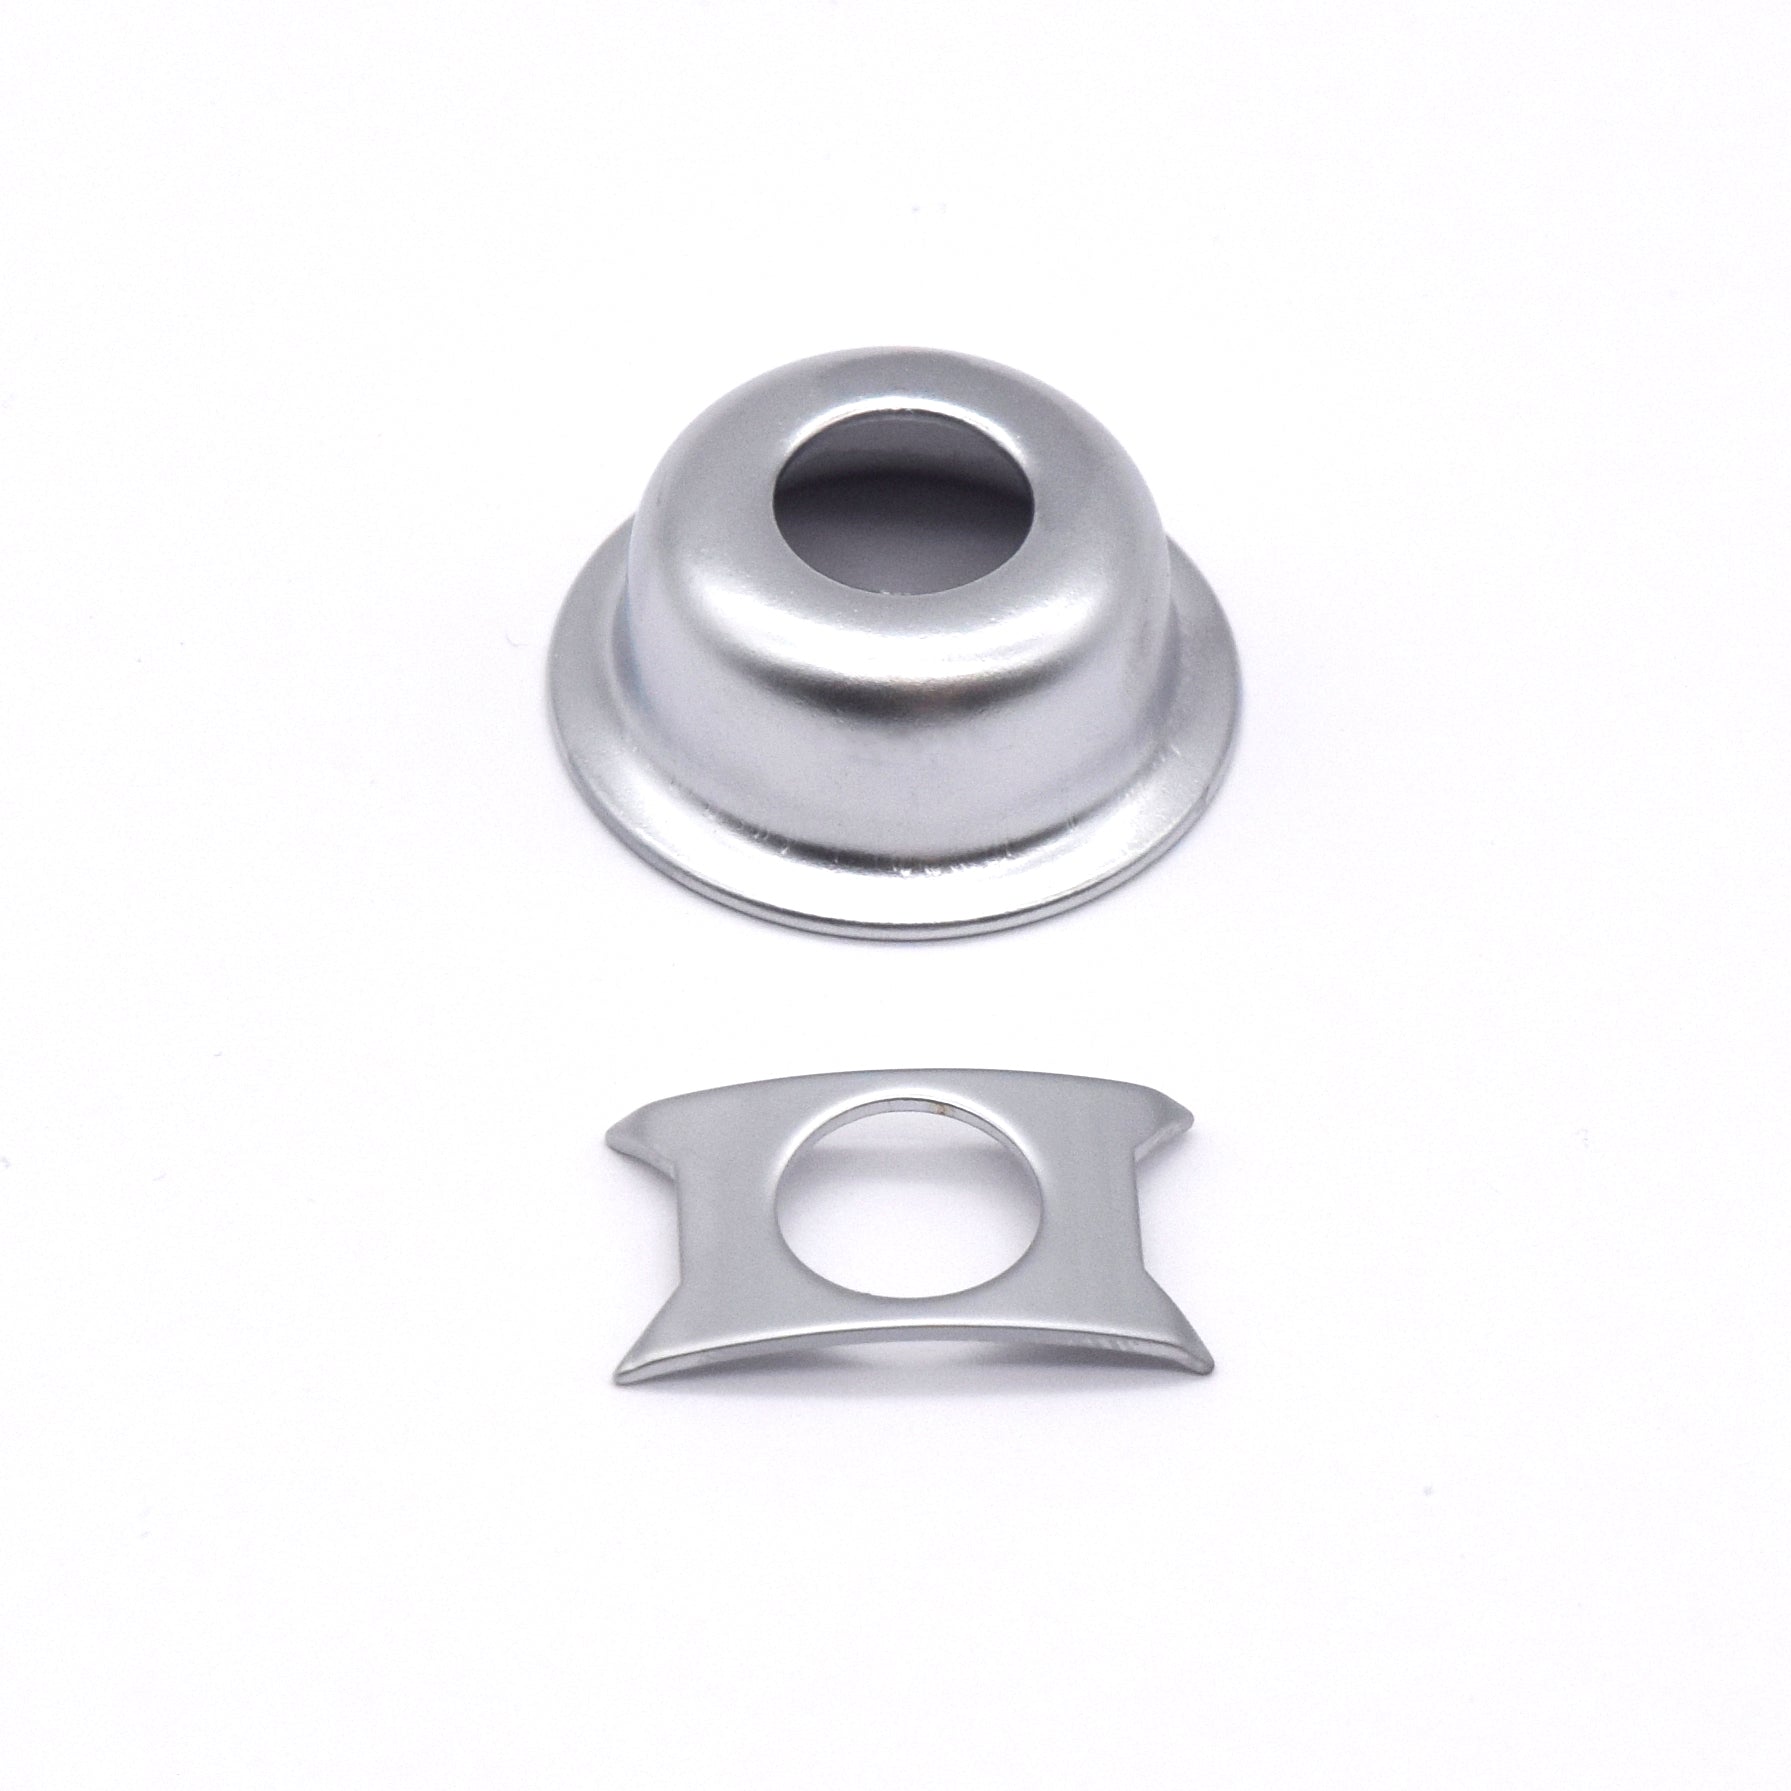 KD By AxLabs "T-Cup" Round Recessed Jack Plate for Tele®-style - AxLabs